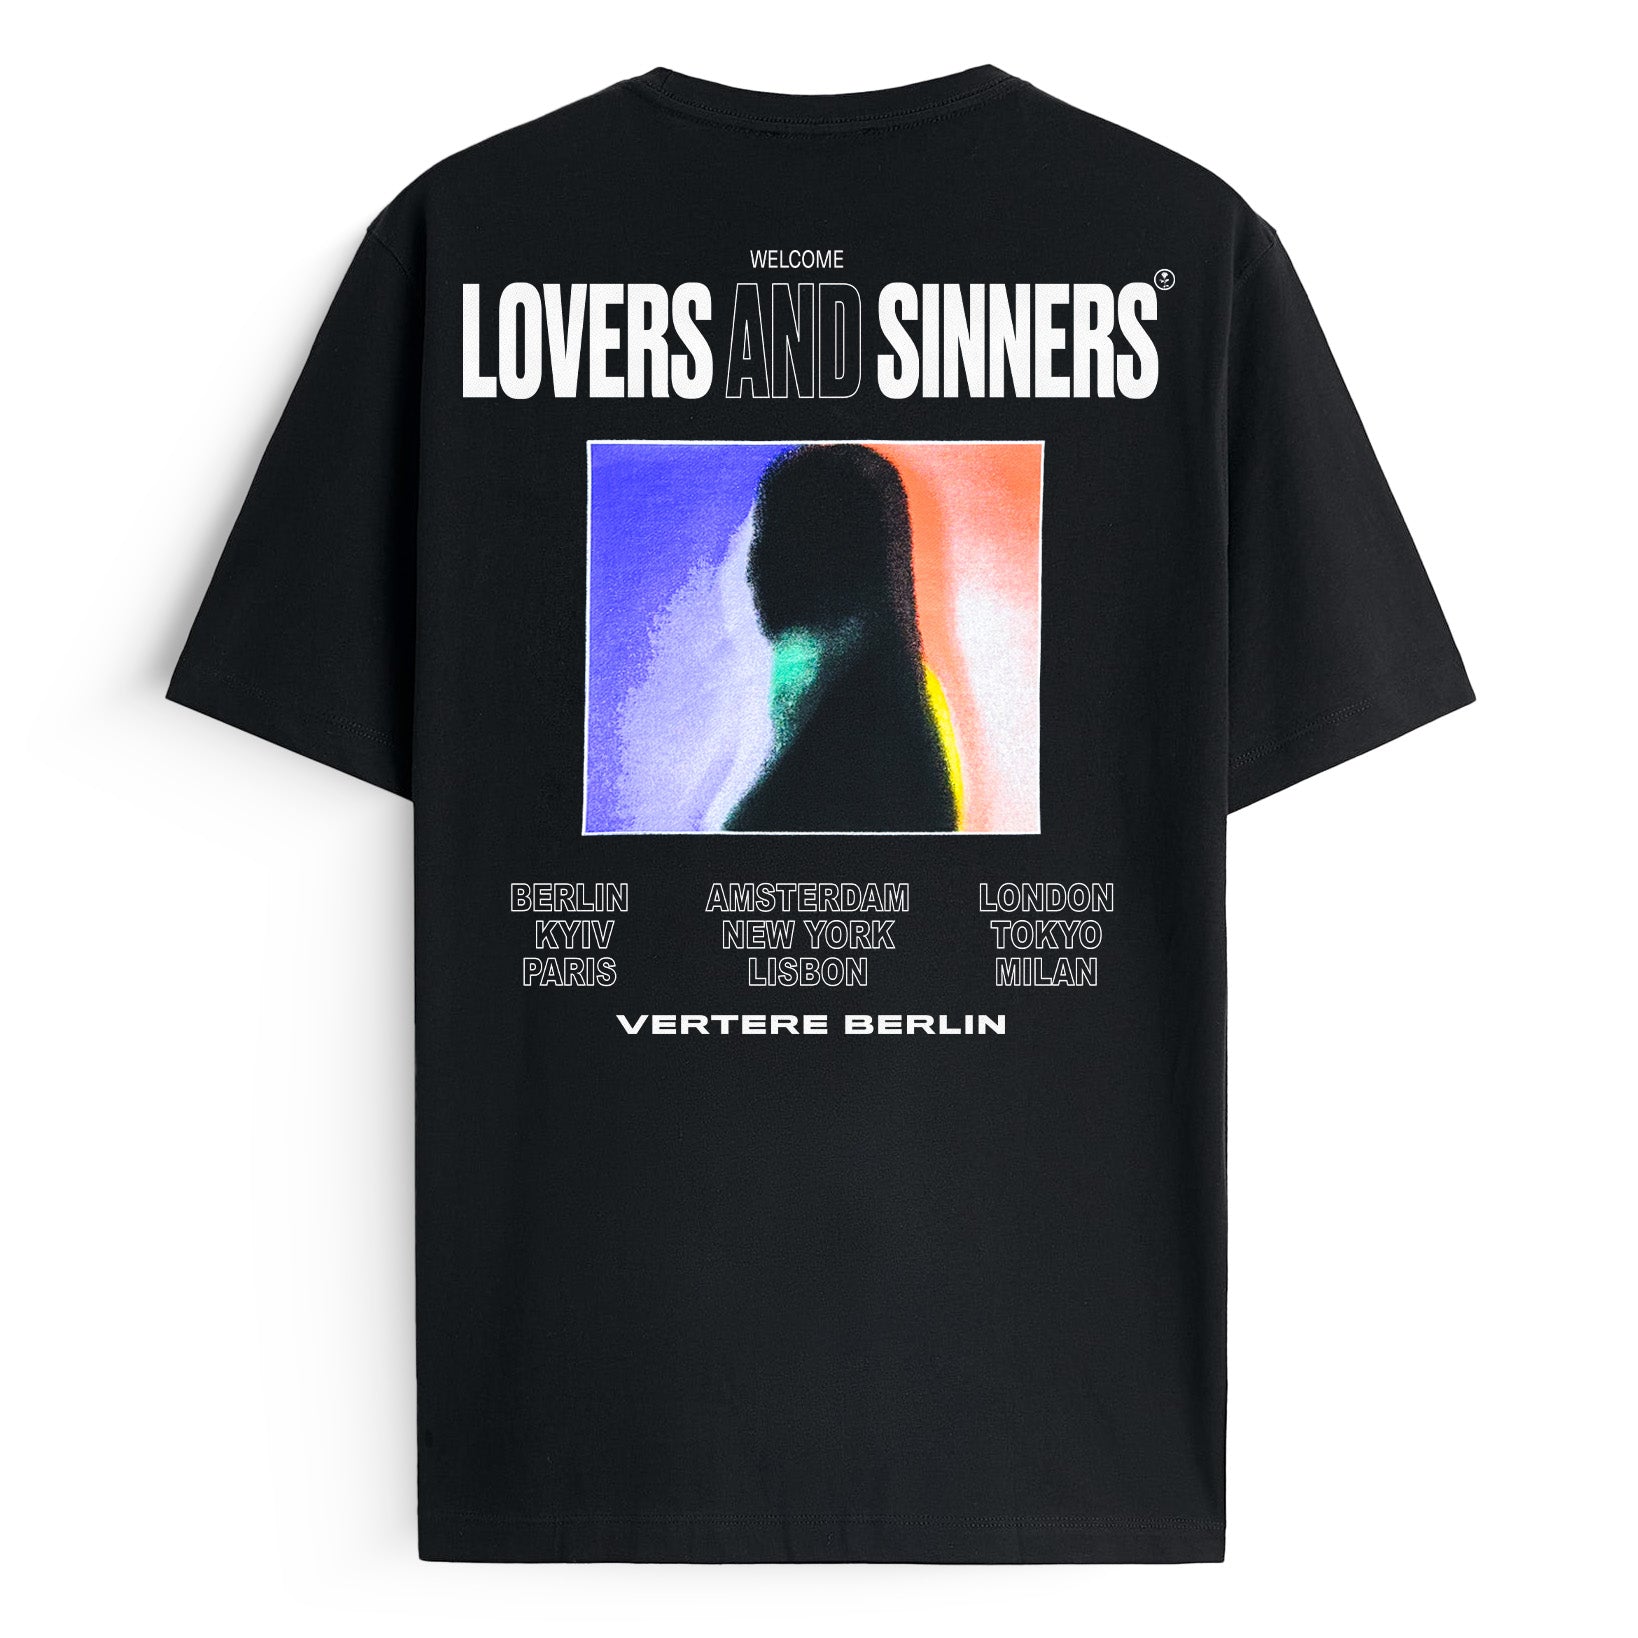 LOVERS AND SINNERS T-SHIRT - BLACK